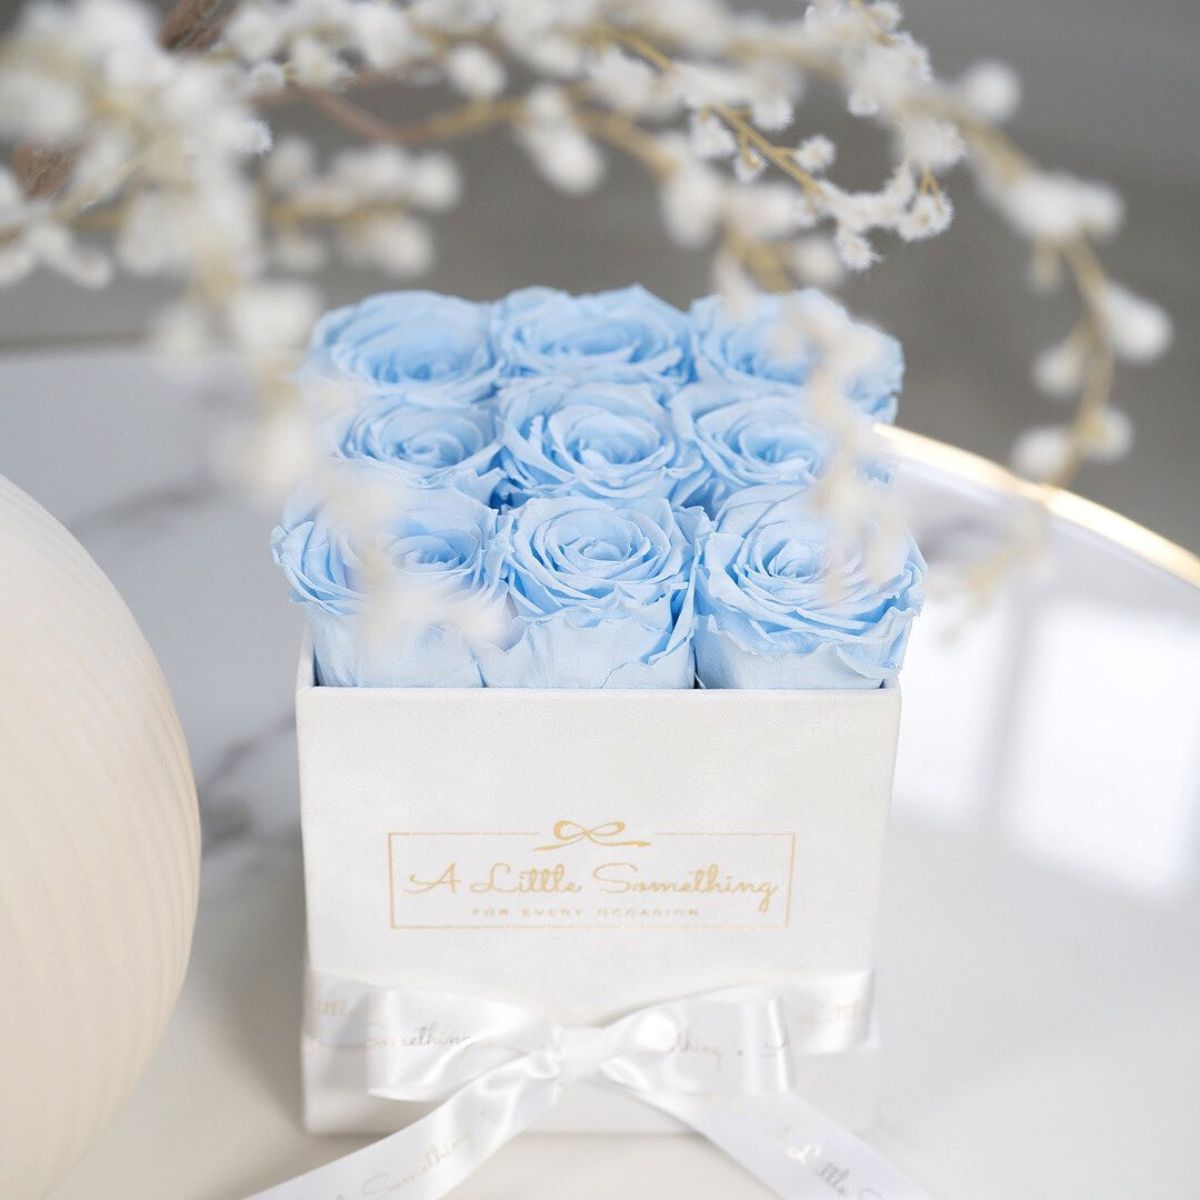 Infinity roses in a box is a great gift